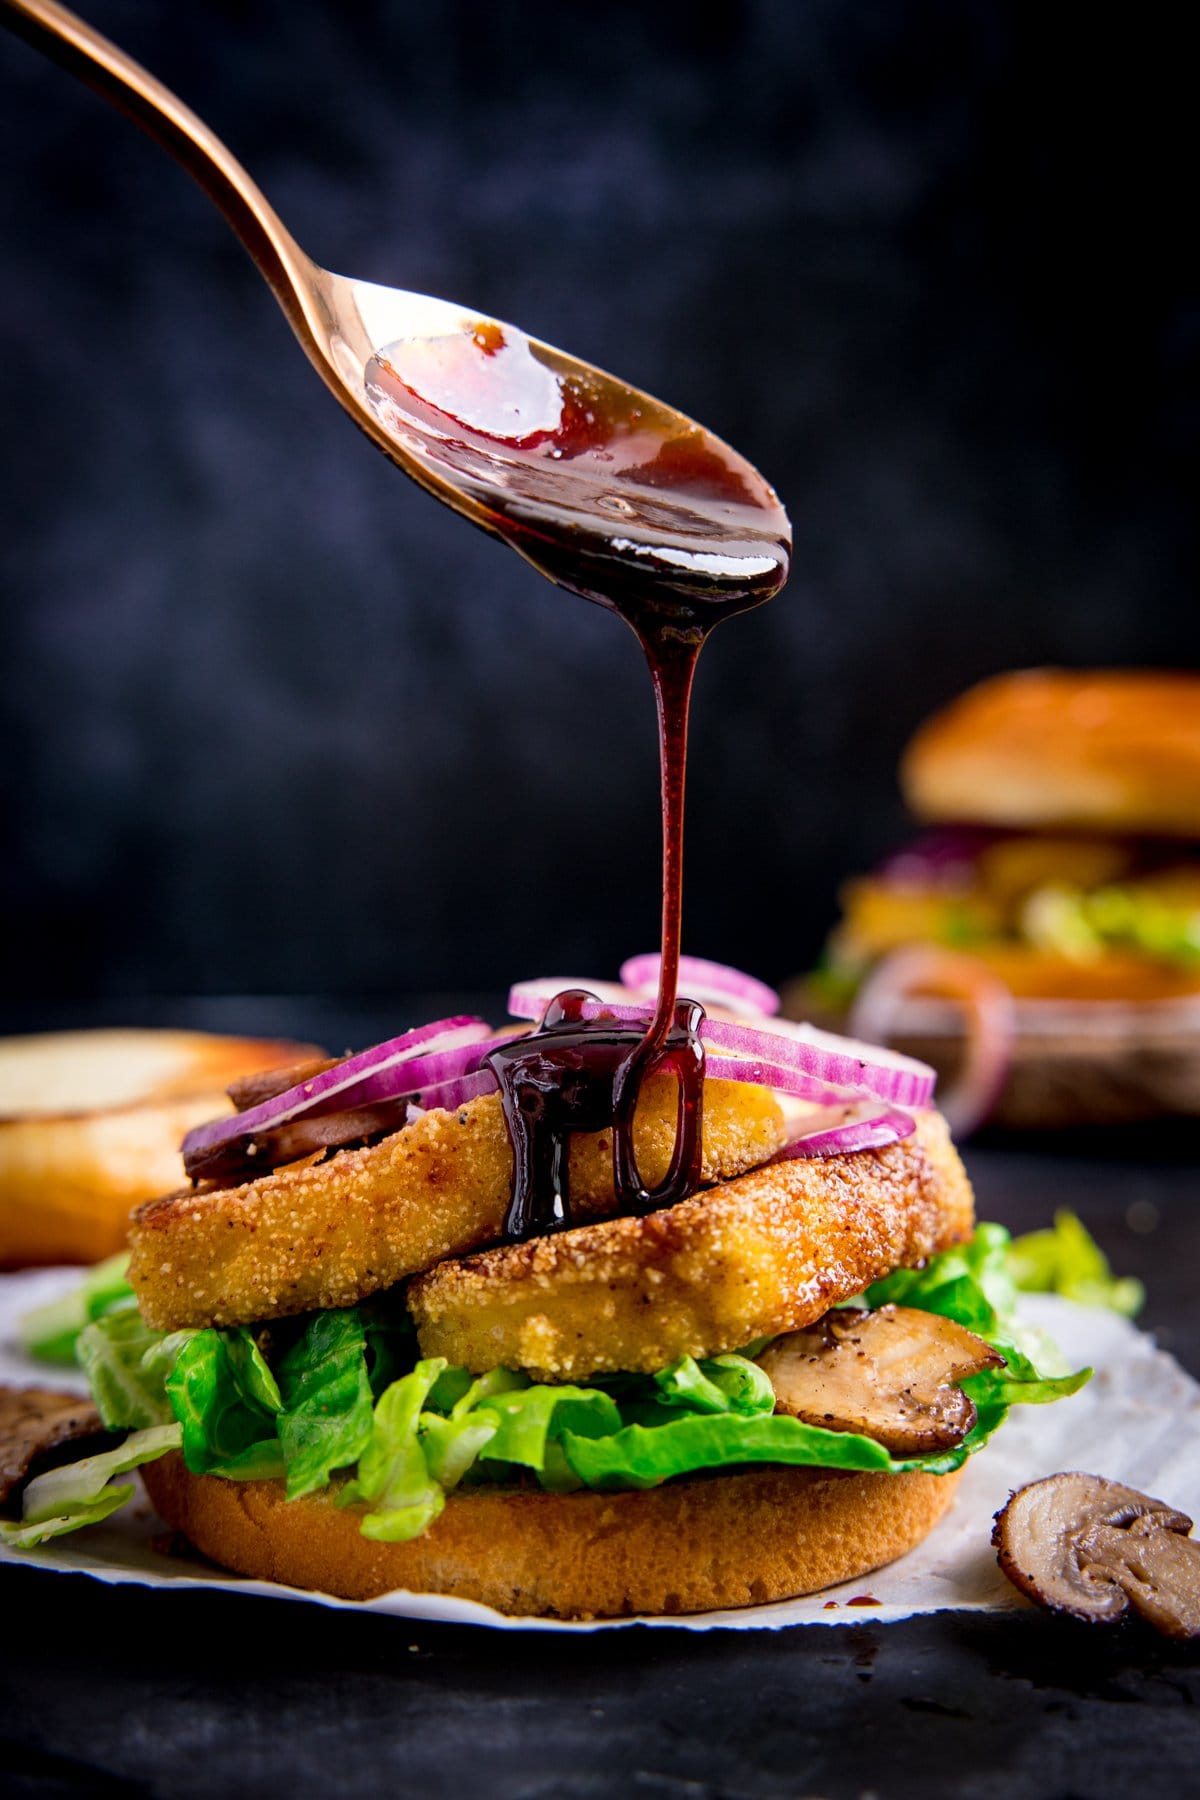 Sticky chilli glaze being drizzled from a spoon onto an open crispy halloumi burger. The burger is on a piece of parchment against a dark background.